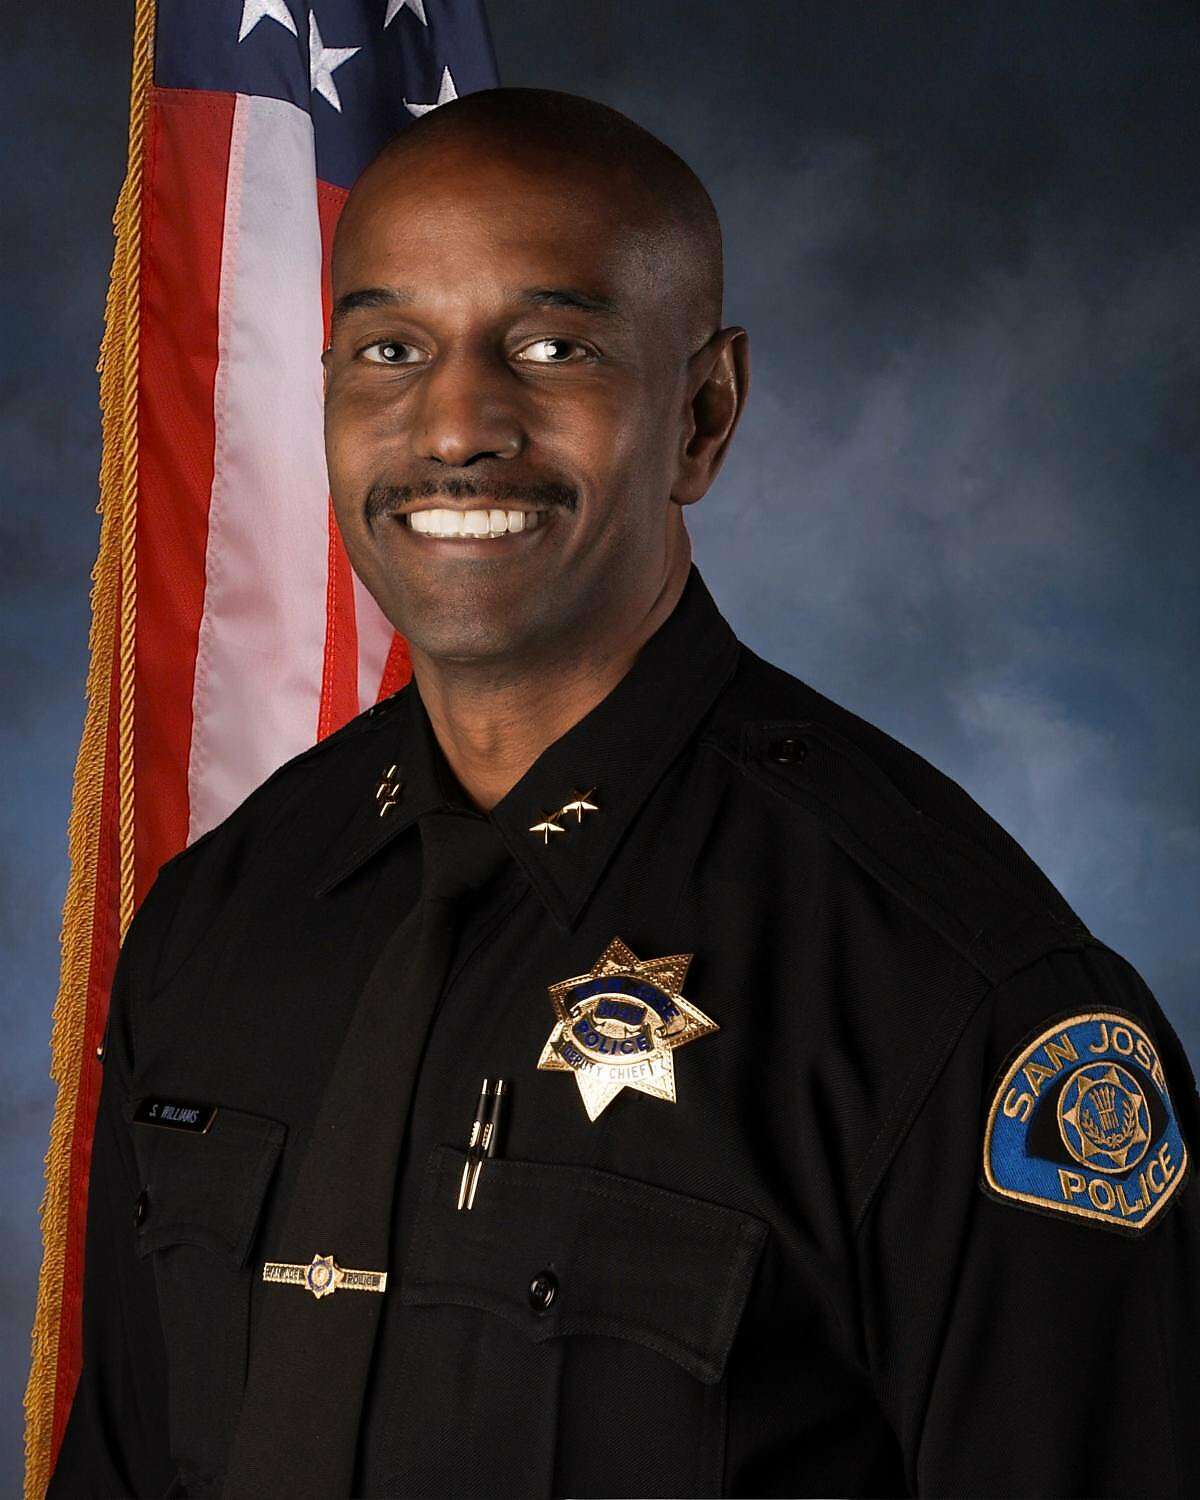 Shawny Williams has been named the new chief of police in Vallejo, Calif. Williams comes from the San Jose Police Department, where he is a deputy chief.